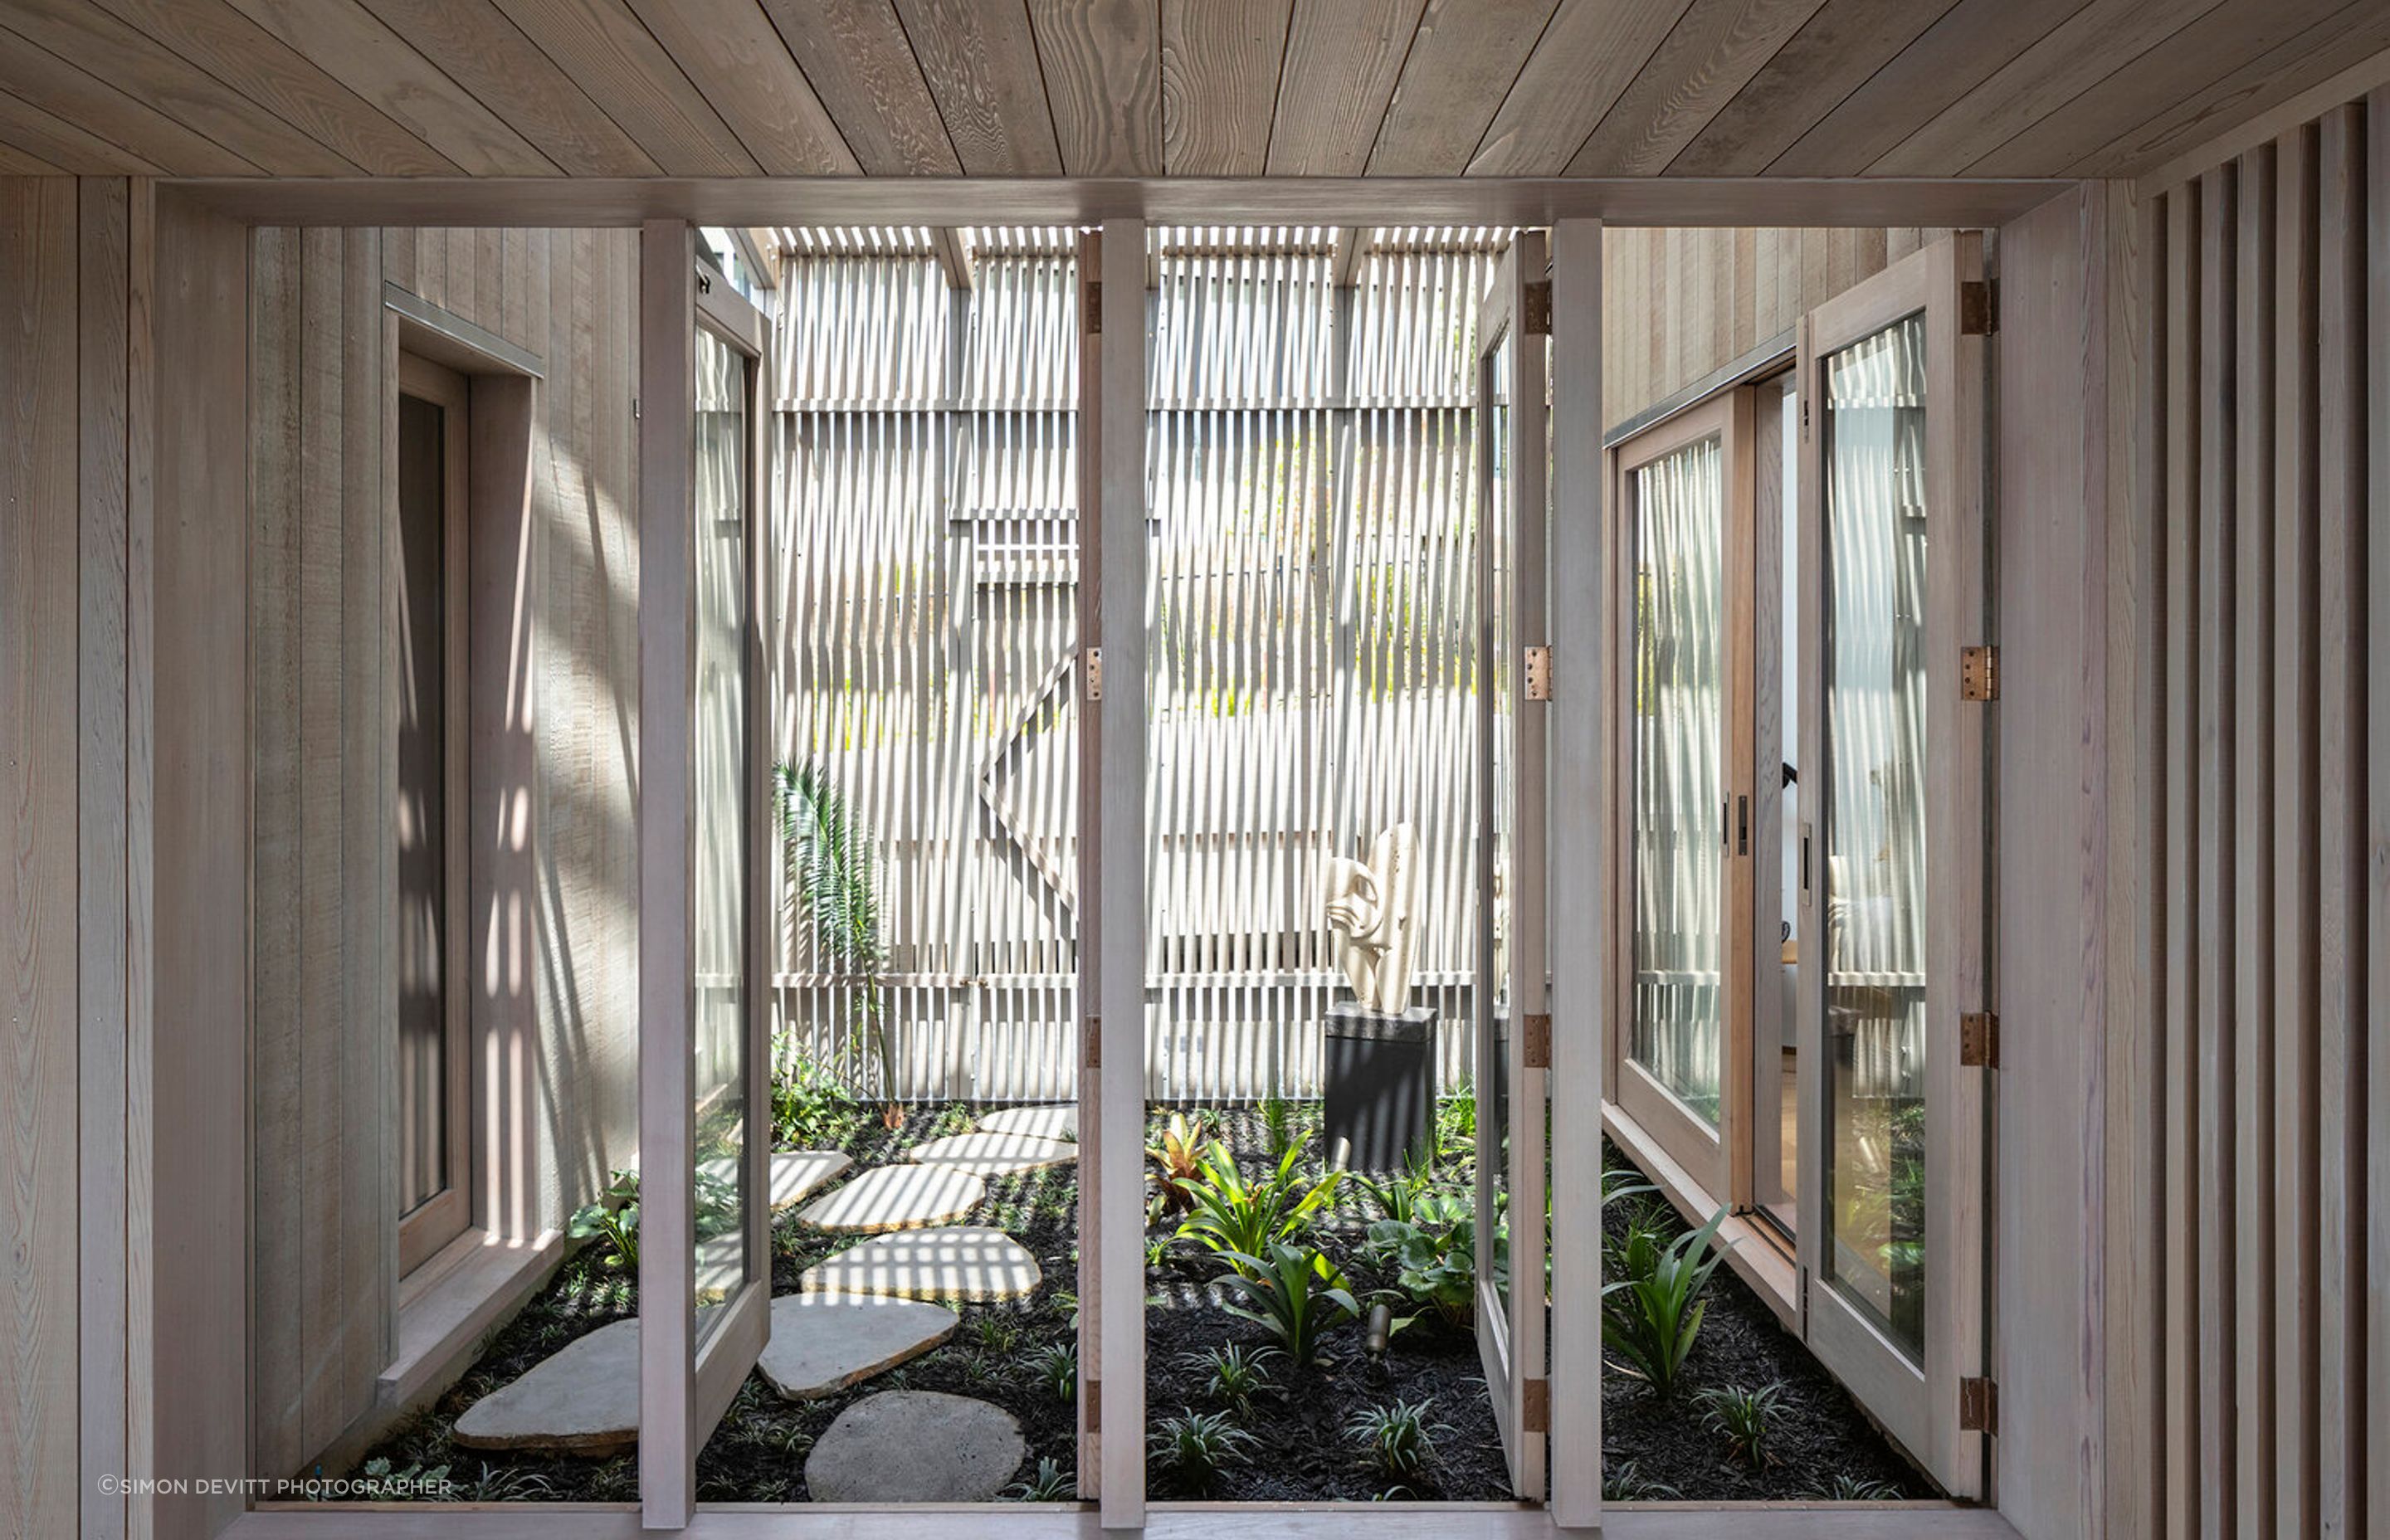 Internal doors access the courtyard, which features an open, slatted screen to allow for uninterrupted air flow.